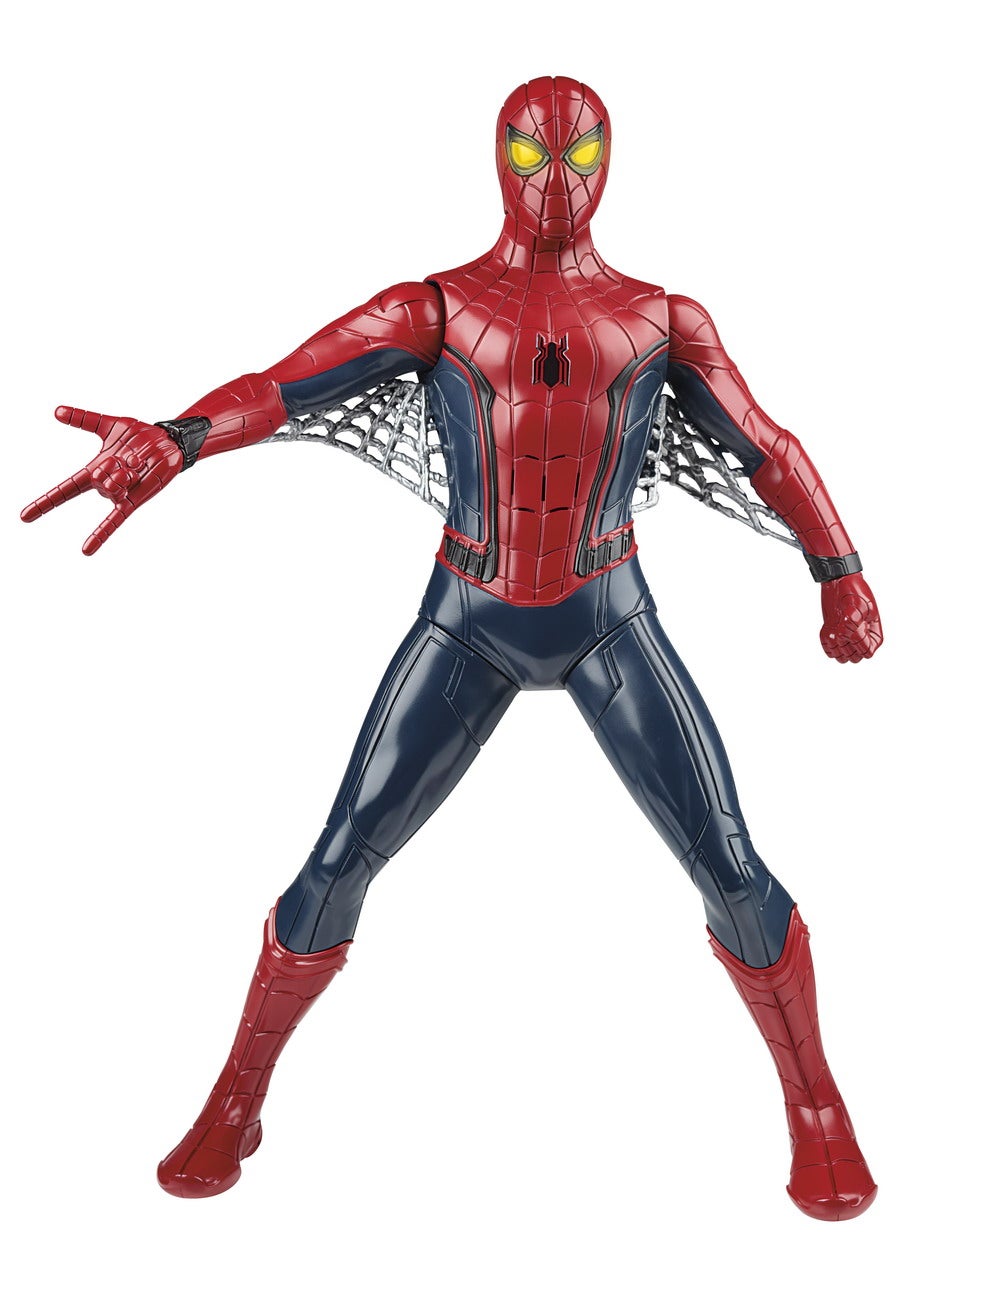 SPIDER-MAN HOMECOMING 15-INCH TECH SUIT SPIDER-MAN Figure (1)